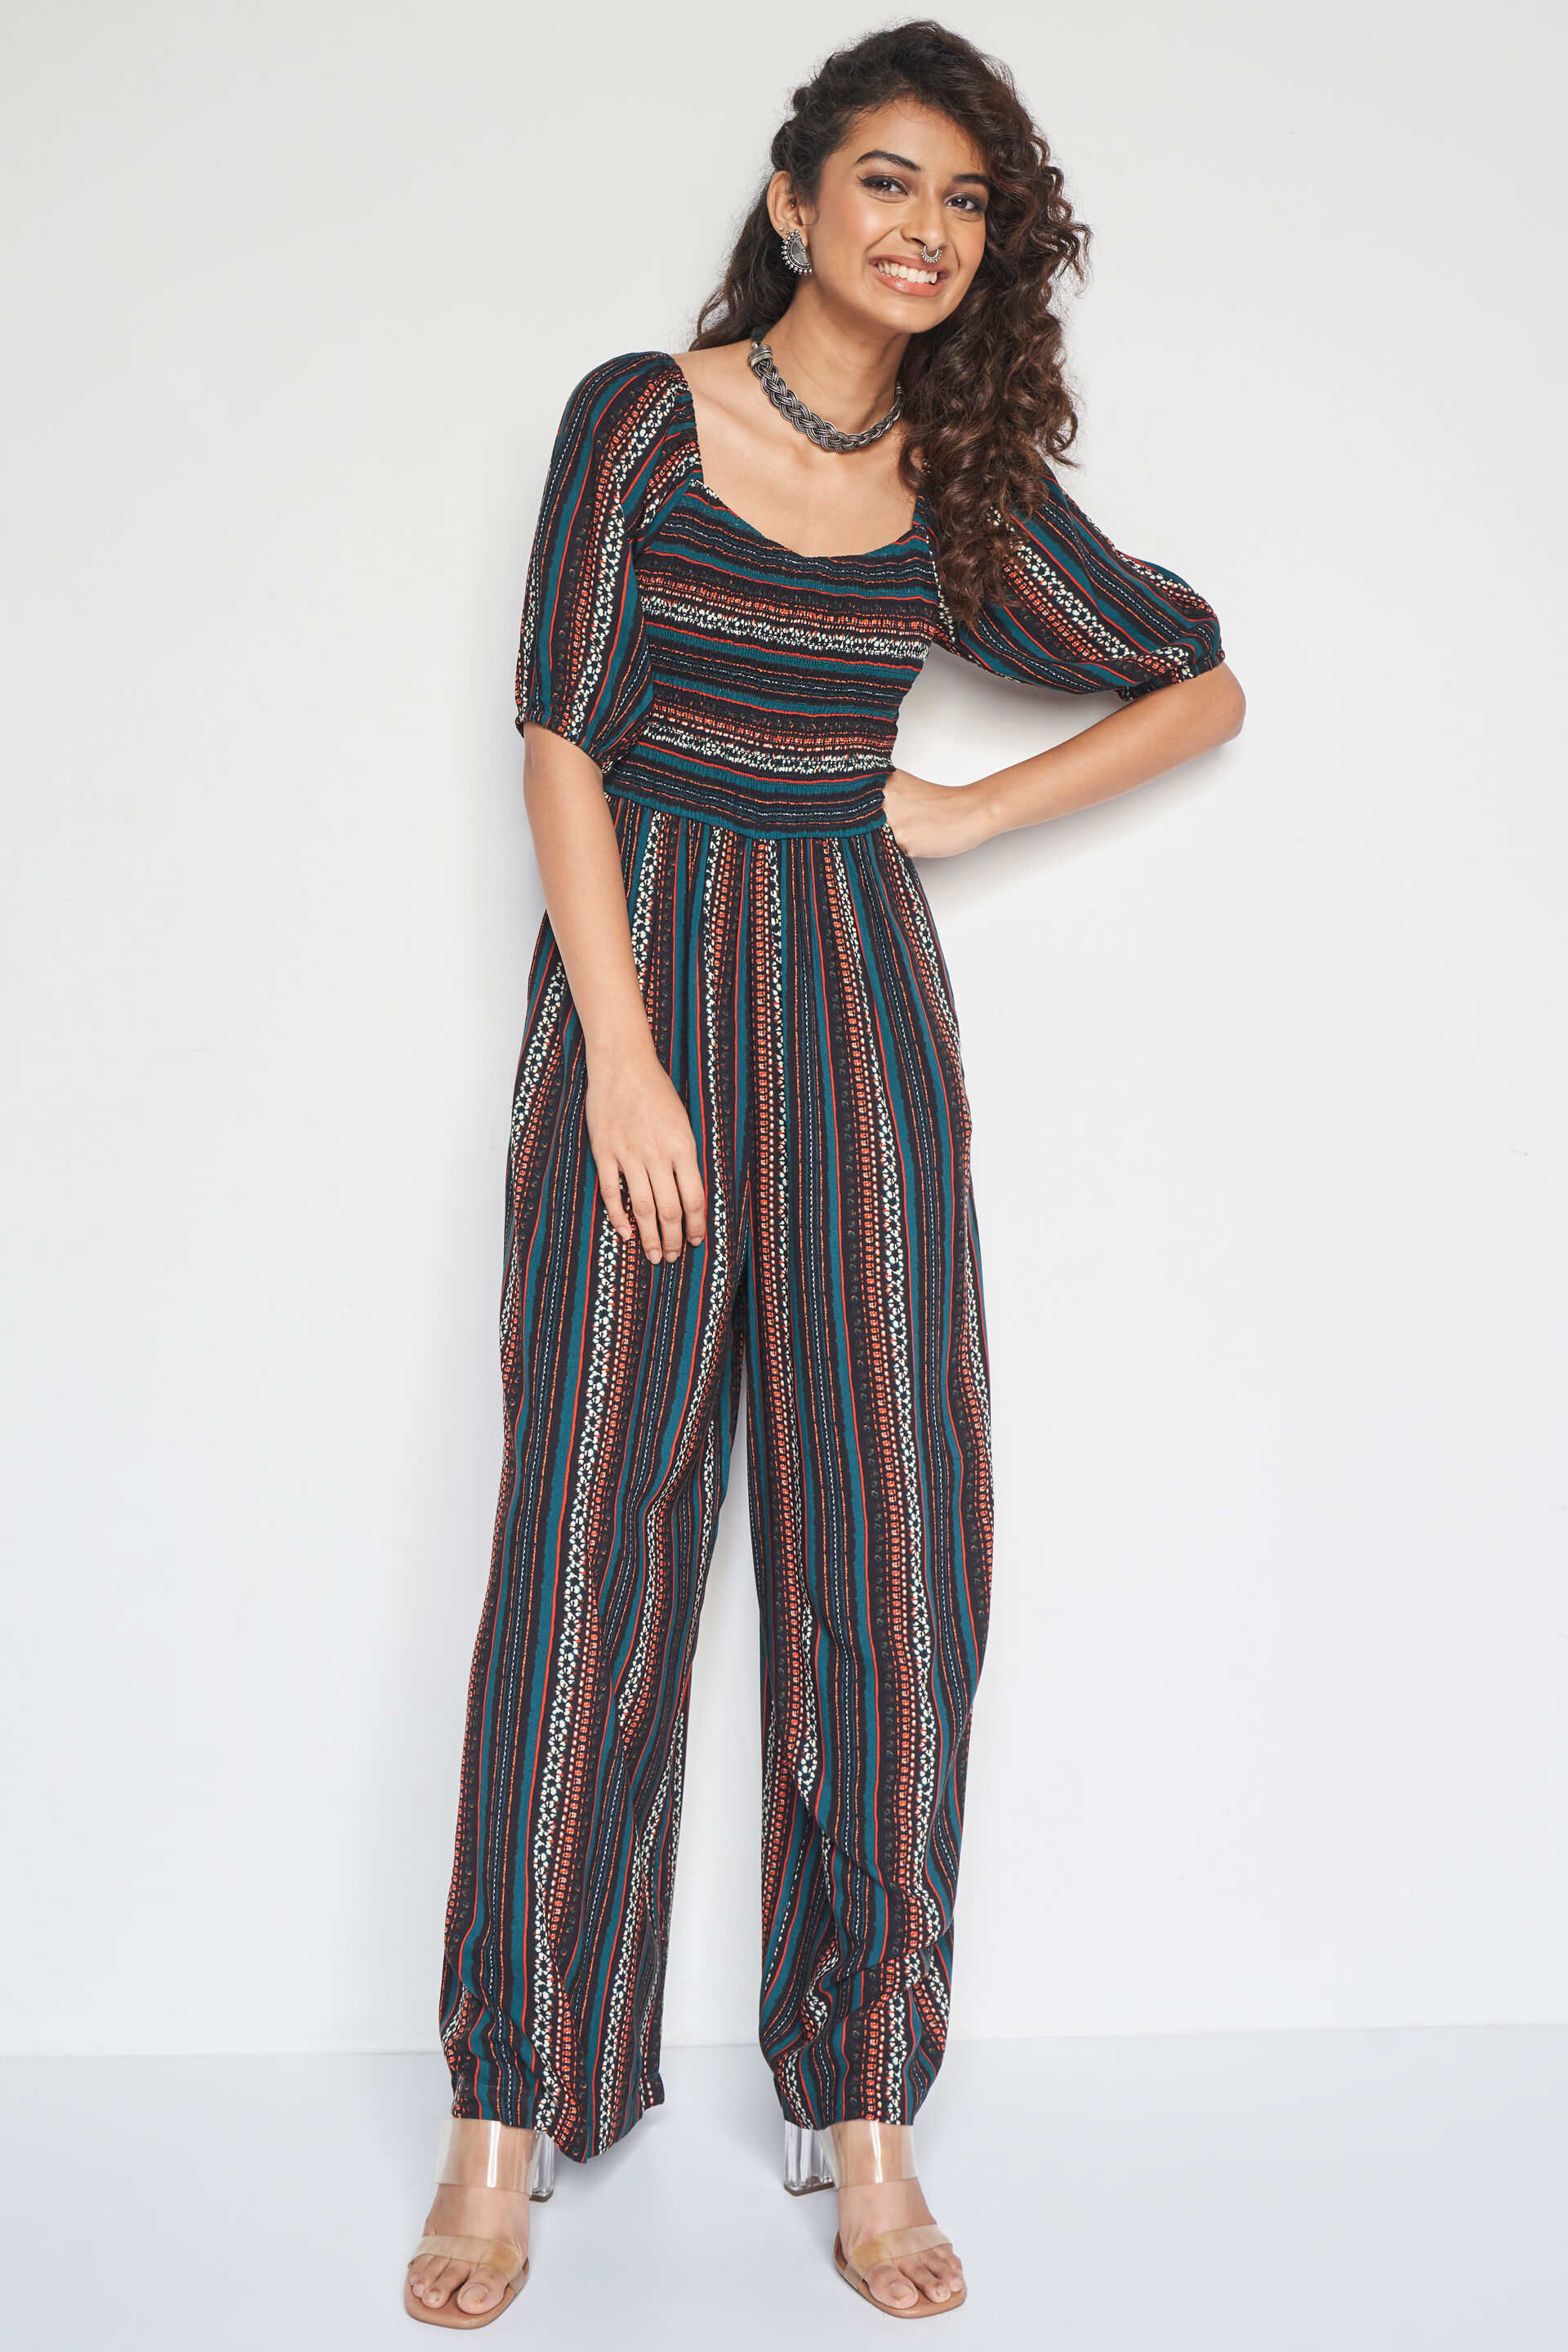 Buy Trendy Jumpsuit Designs by Fashiondeal